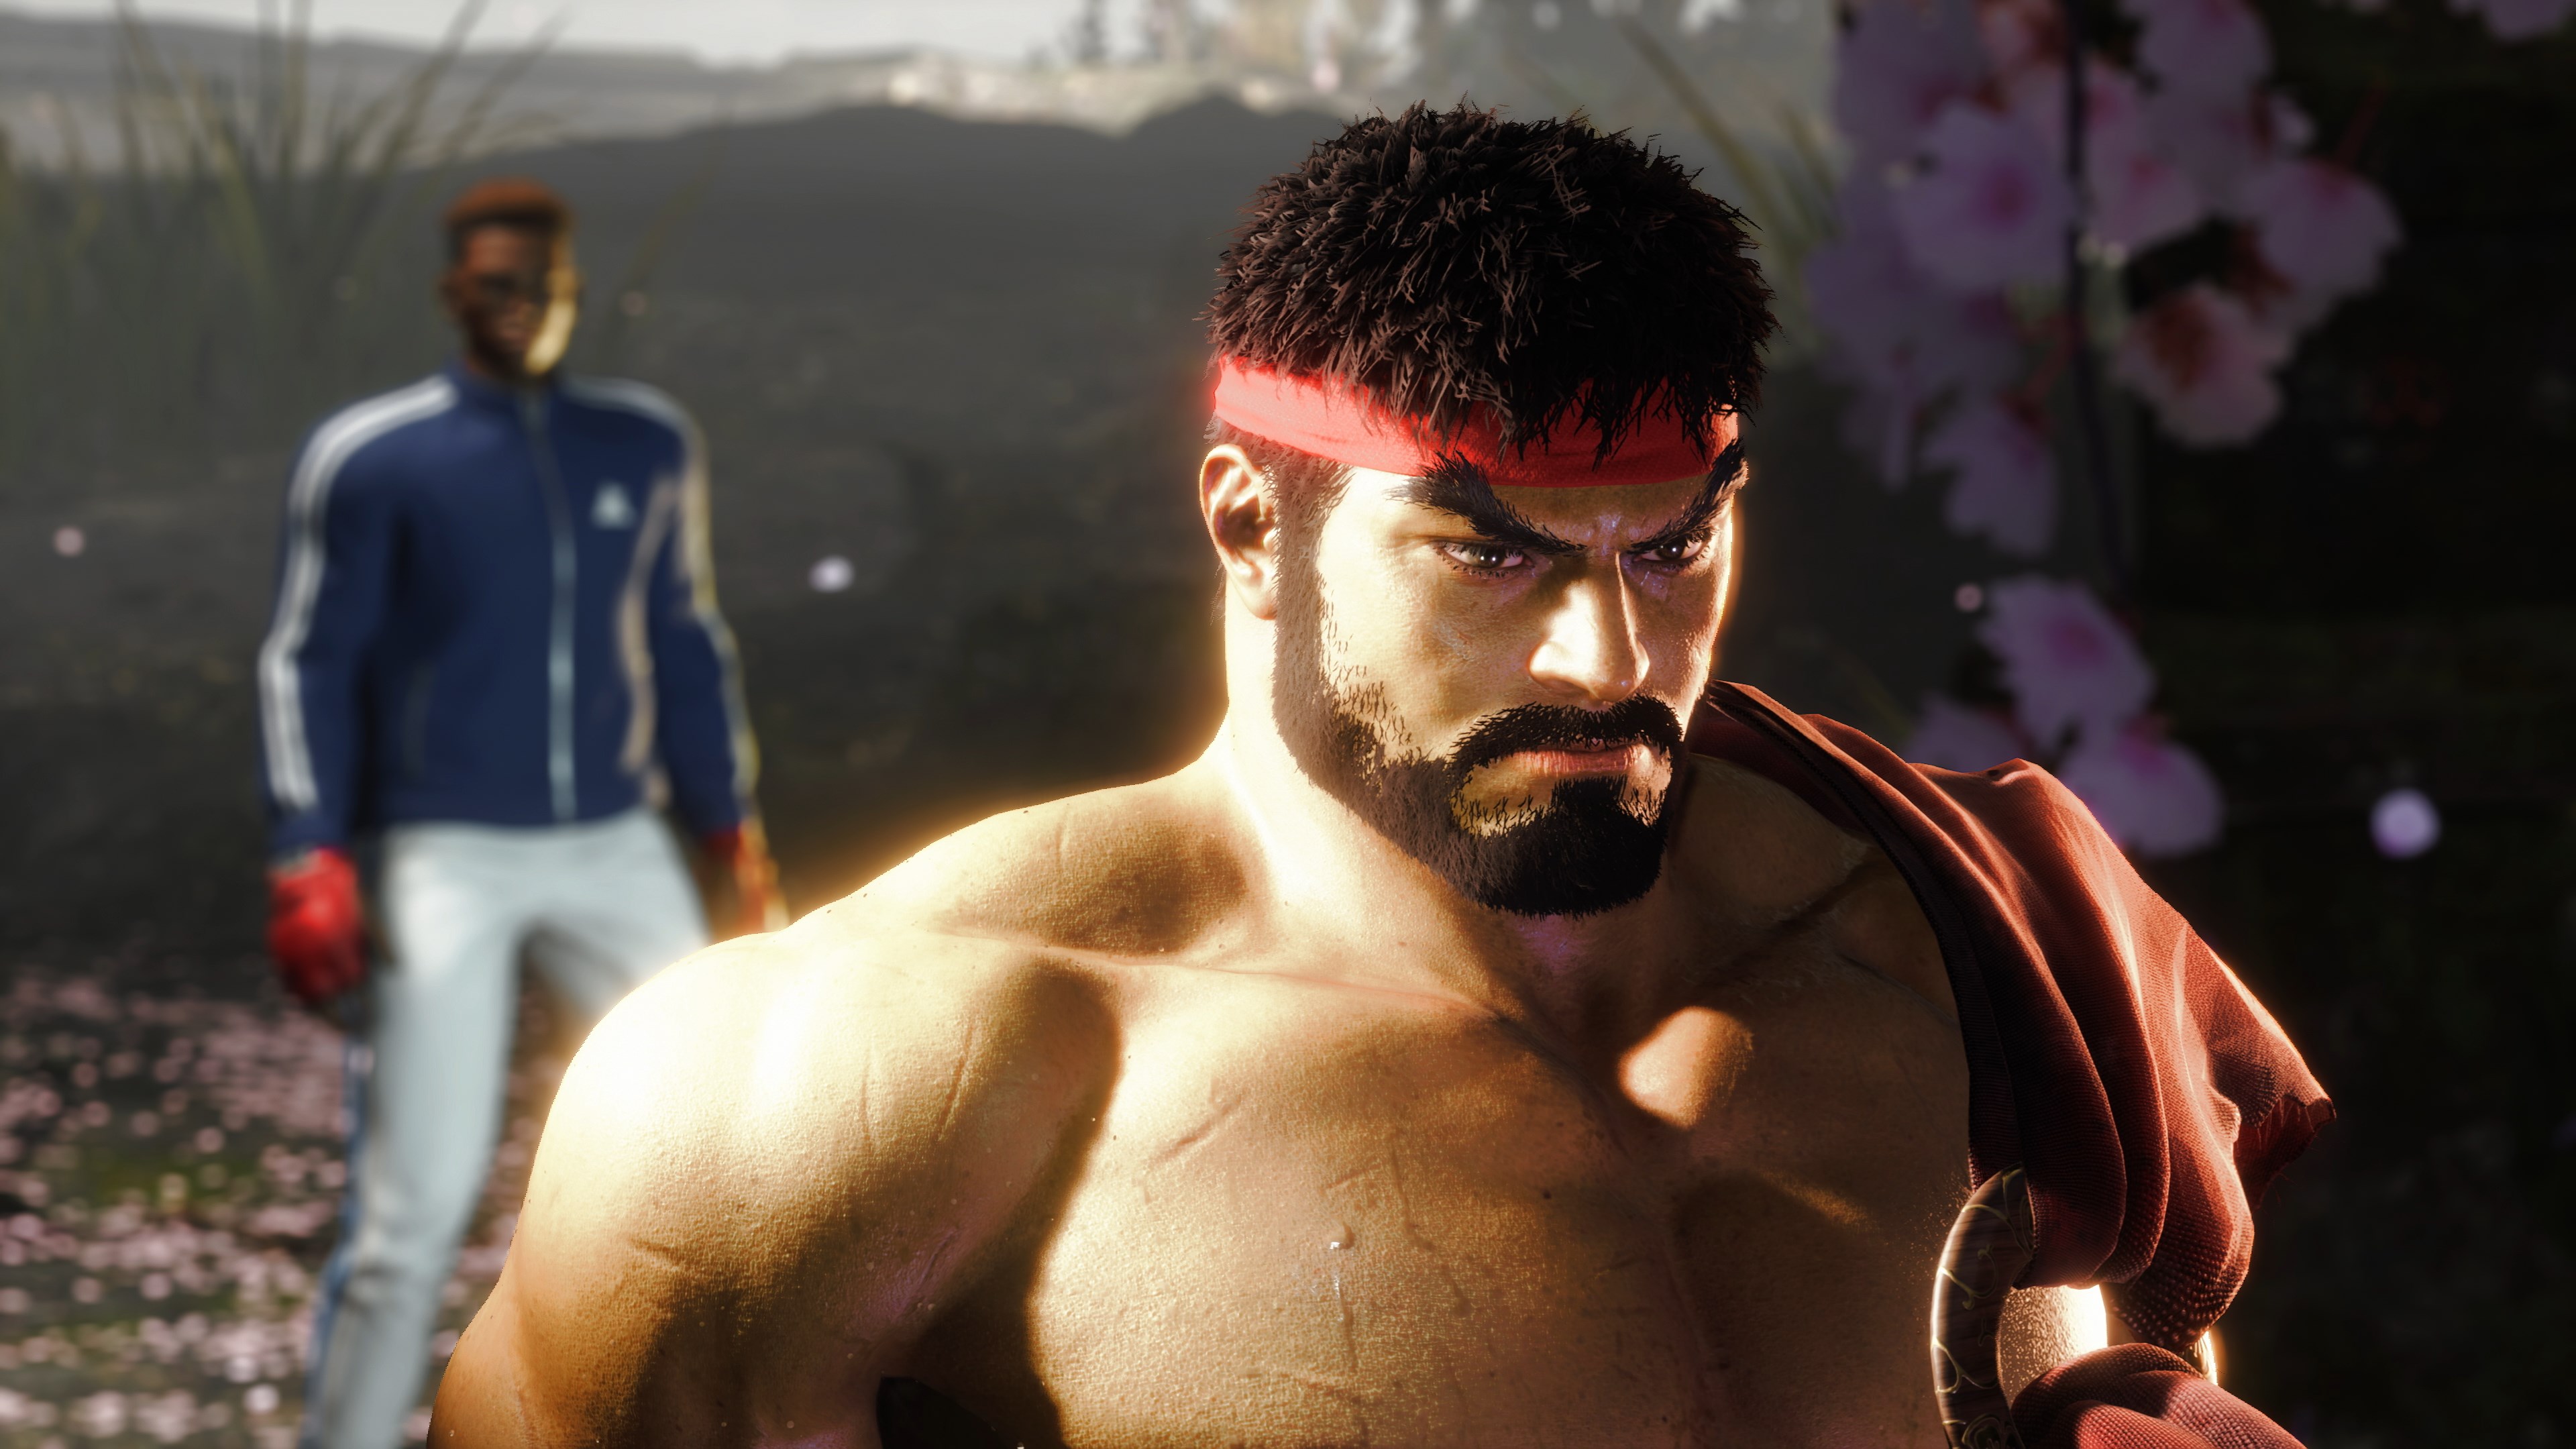 10 Street Fighter Vs Mortal Kombat Fights We'd Love To See